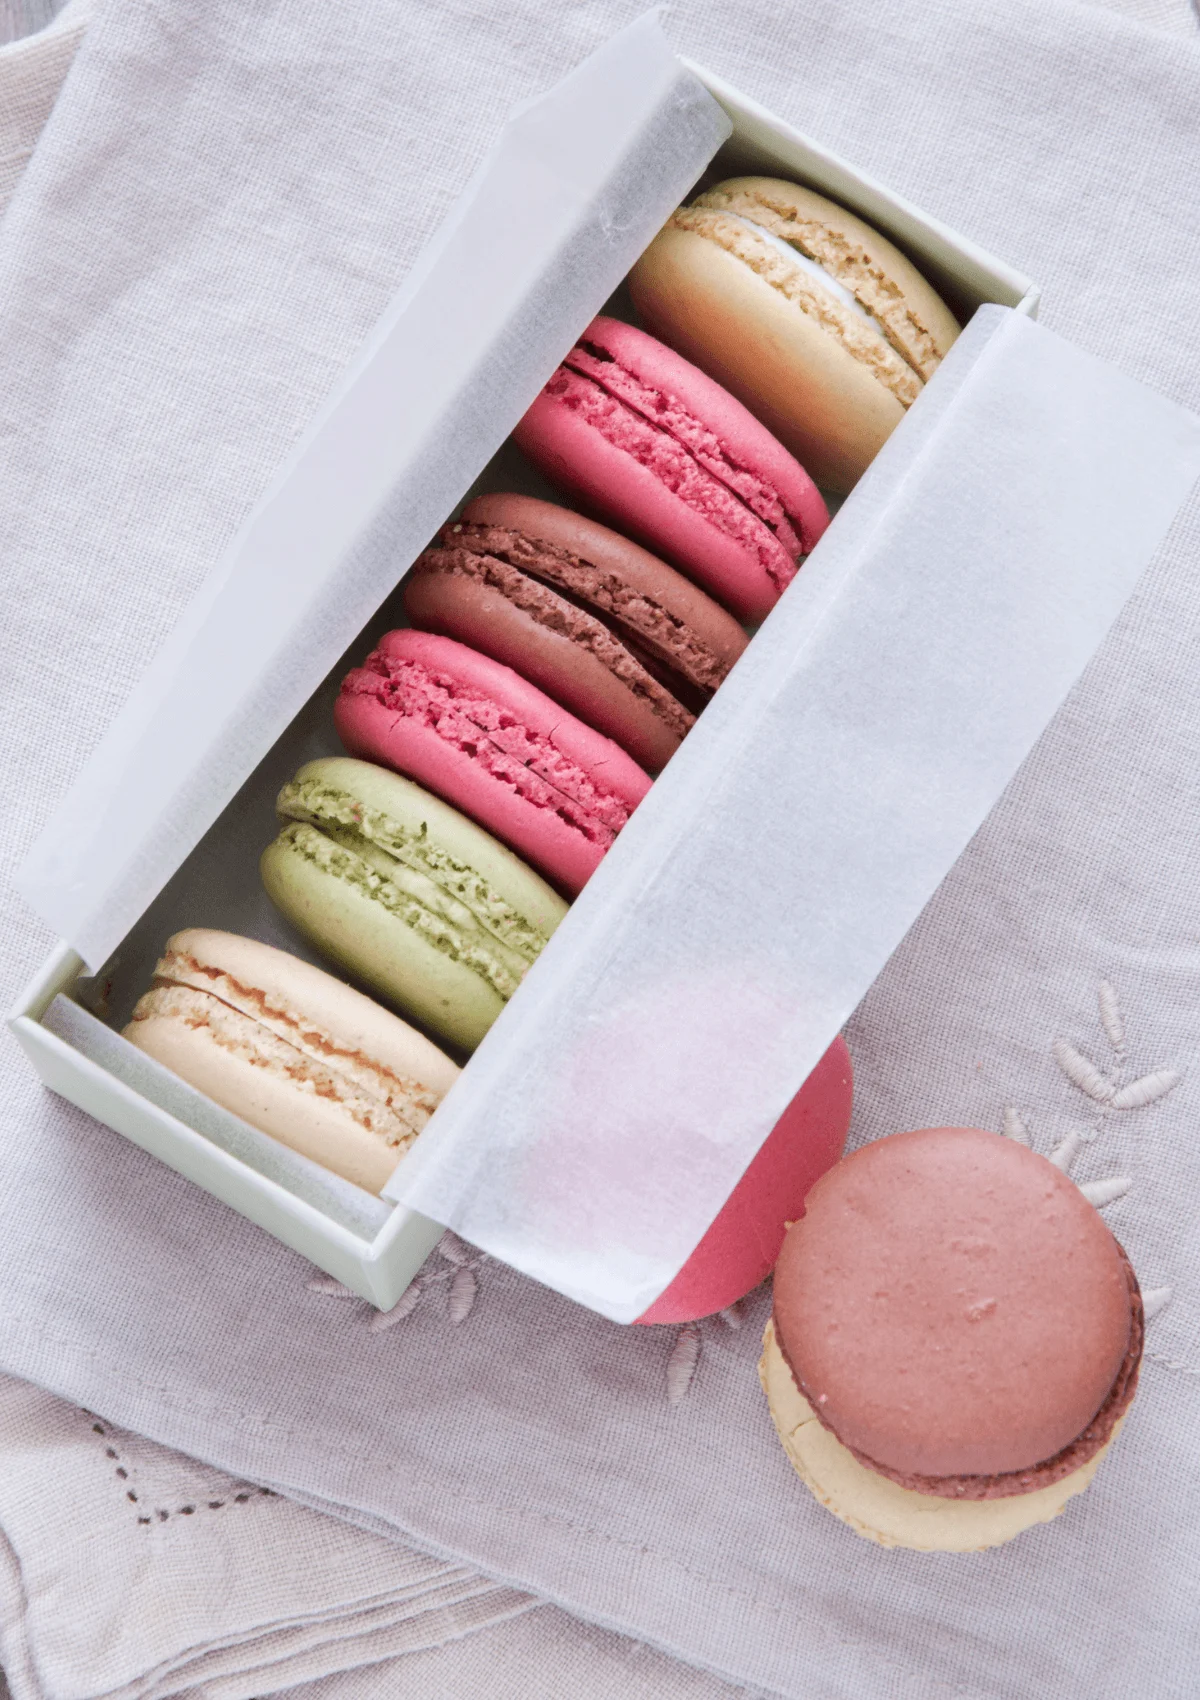 macarons are great souvenirs from Paris